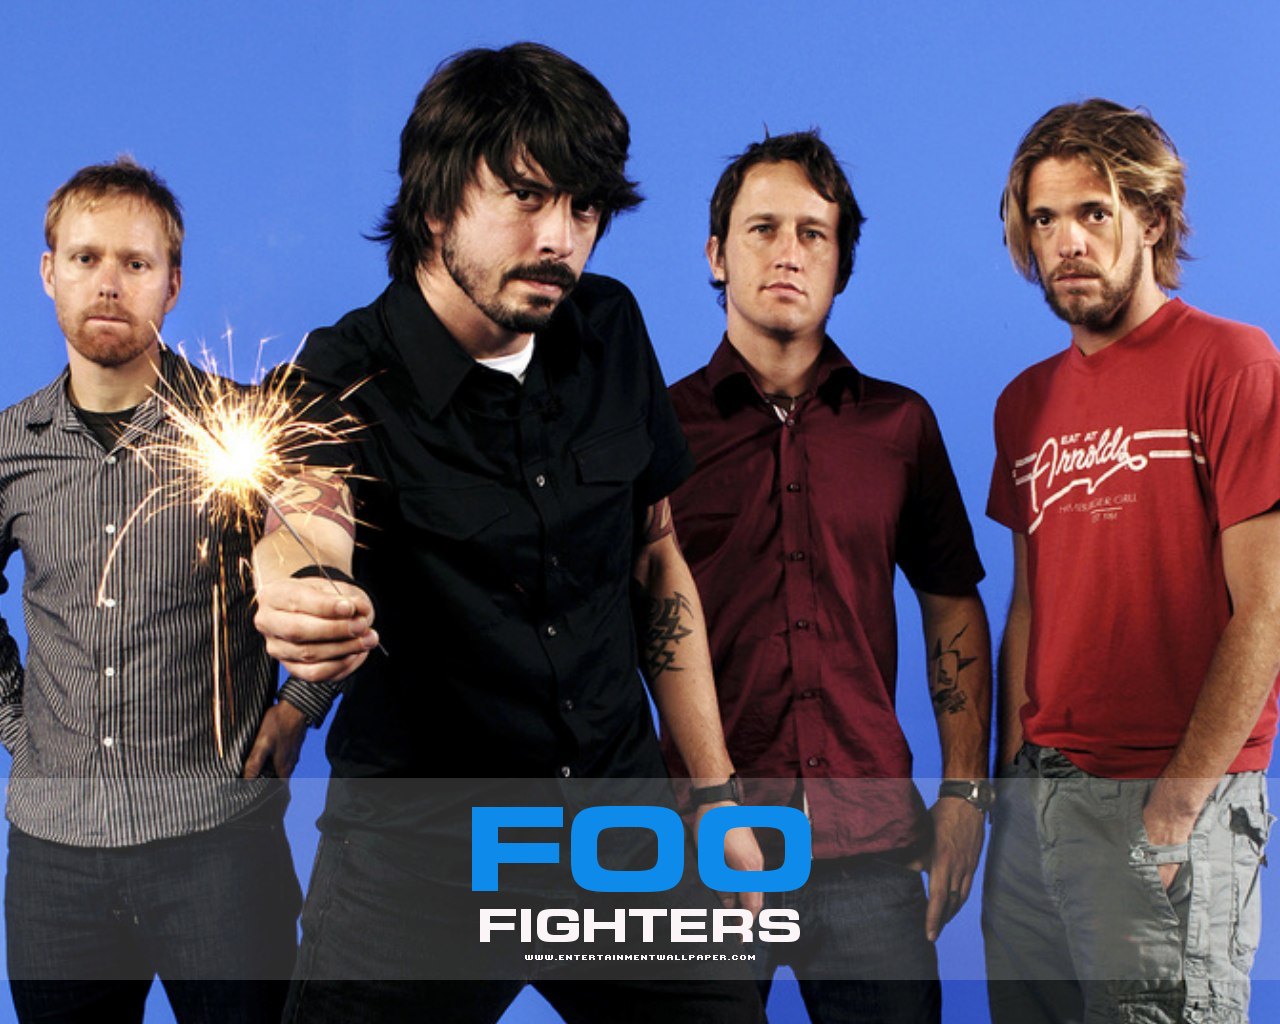 Foo Fighters fundraising for "Rock the Vote," DNC